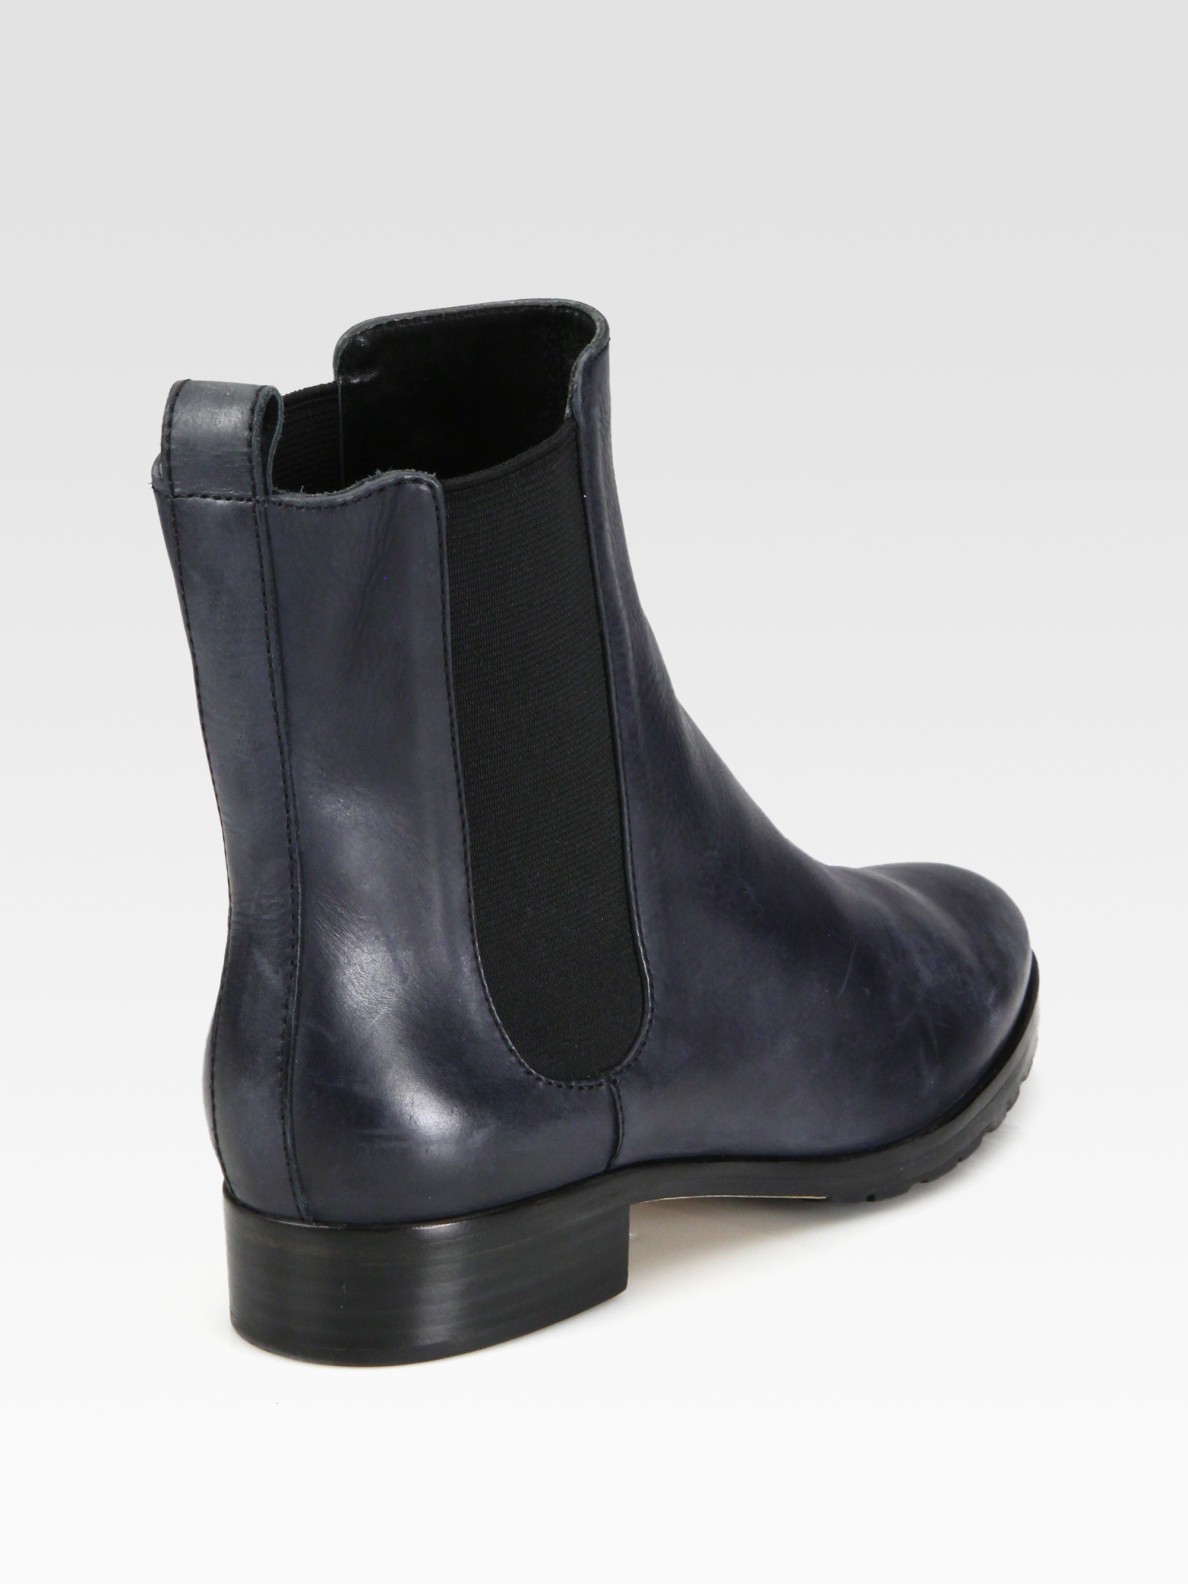 Elizabeth and james Leather Flat Ankle Boots in Black | Lyst